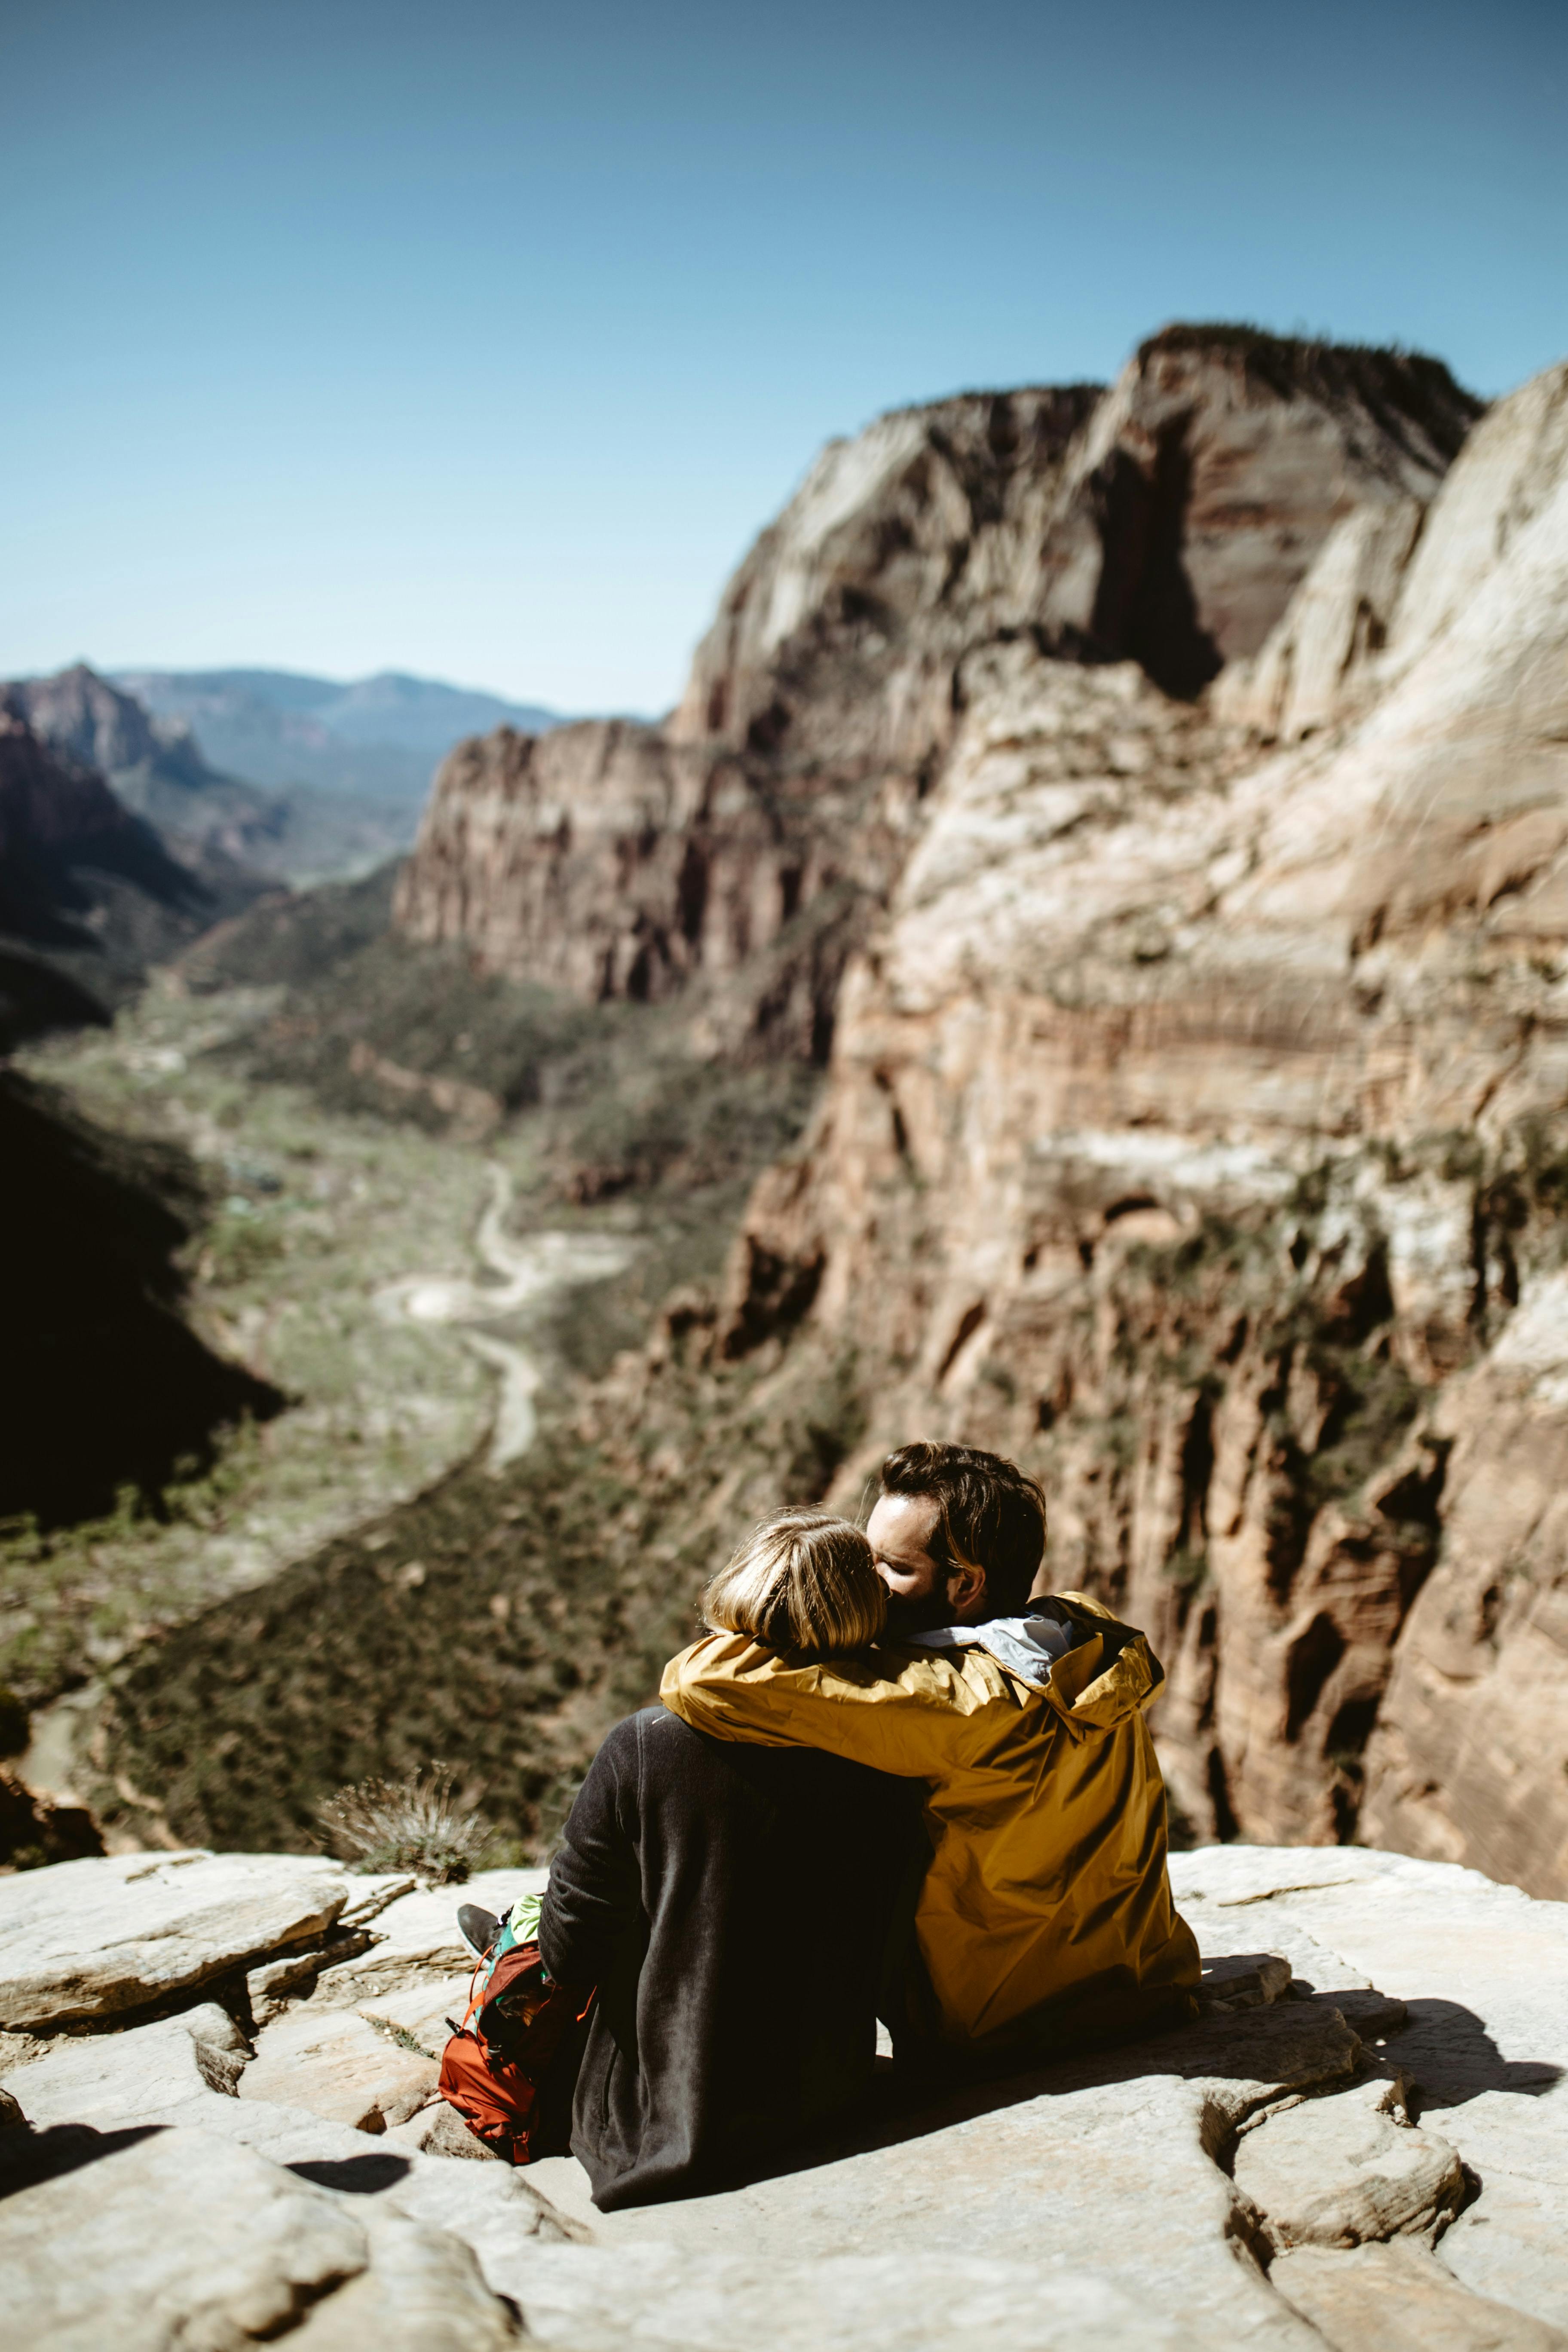 A man and a woman sitting at the top of a hike. The man has his arm around the woman and is kissing her on the cheek.